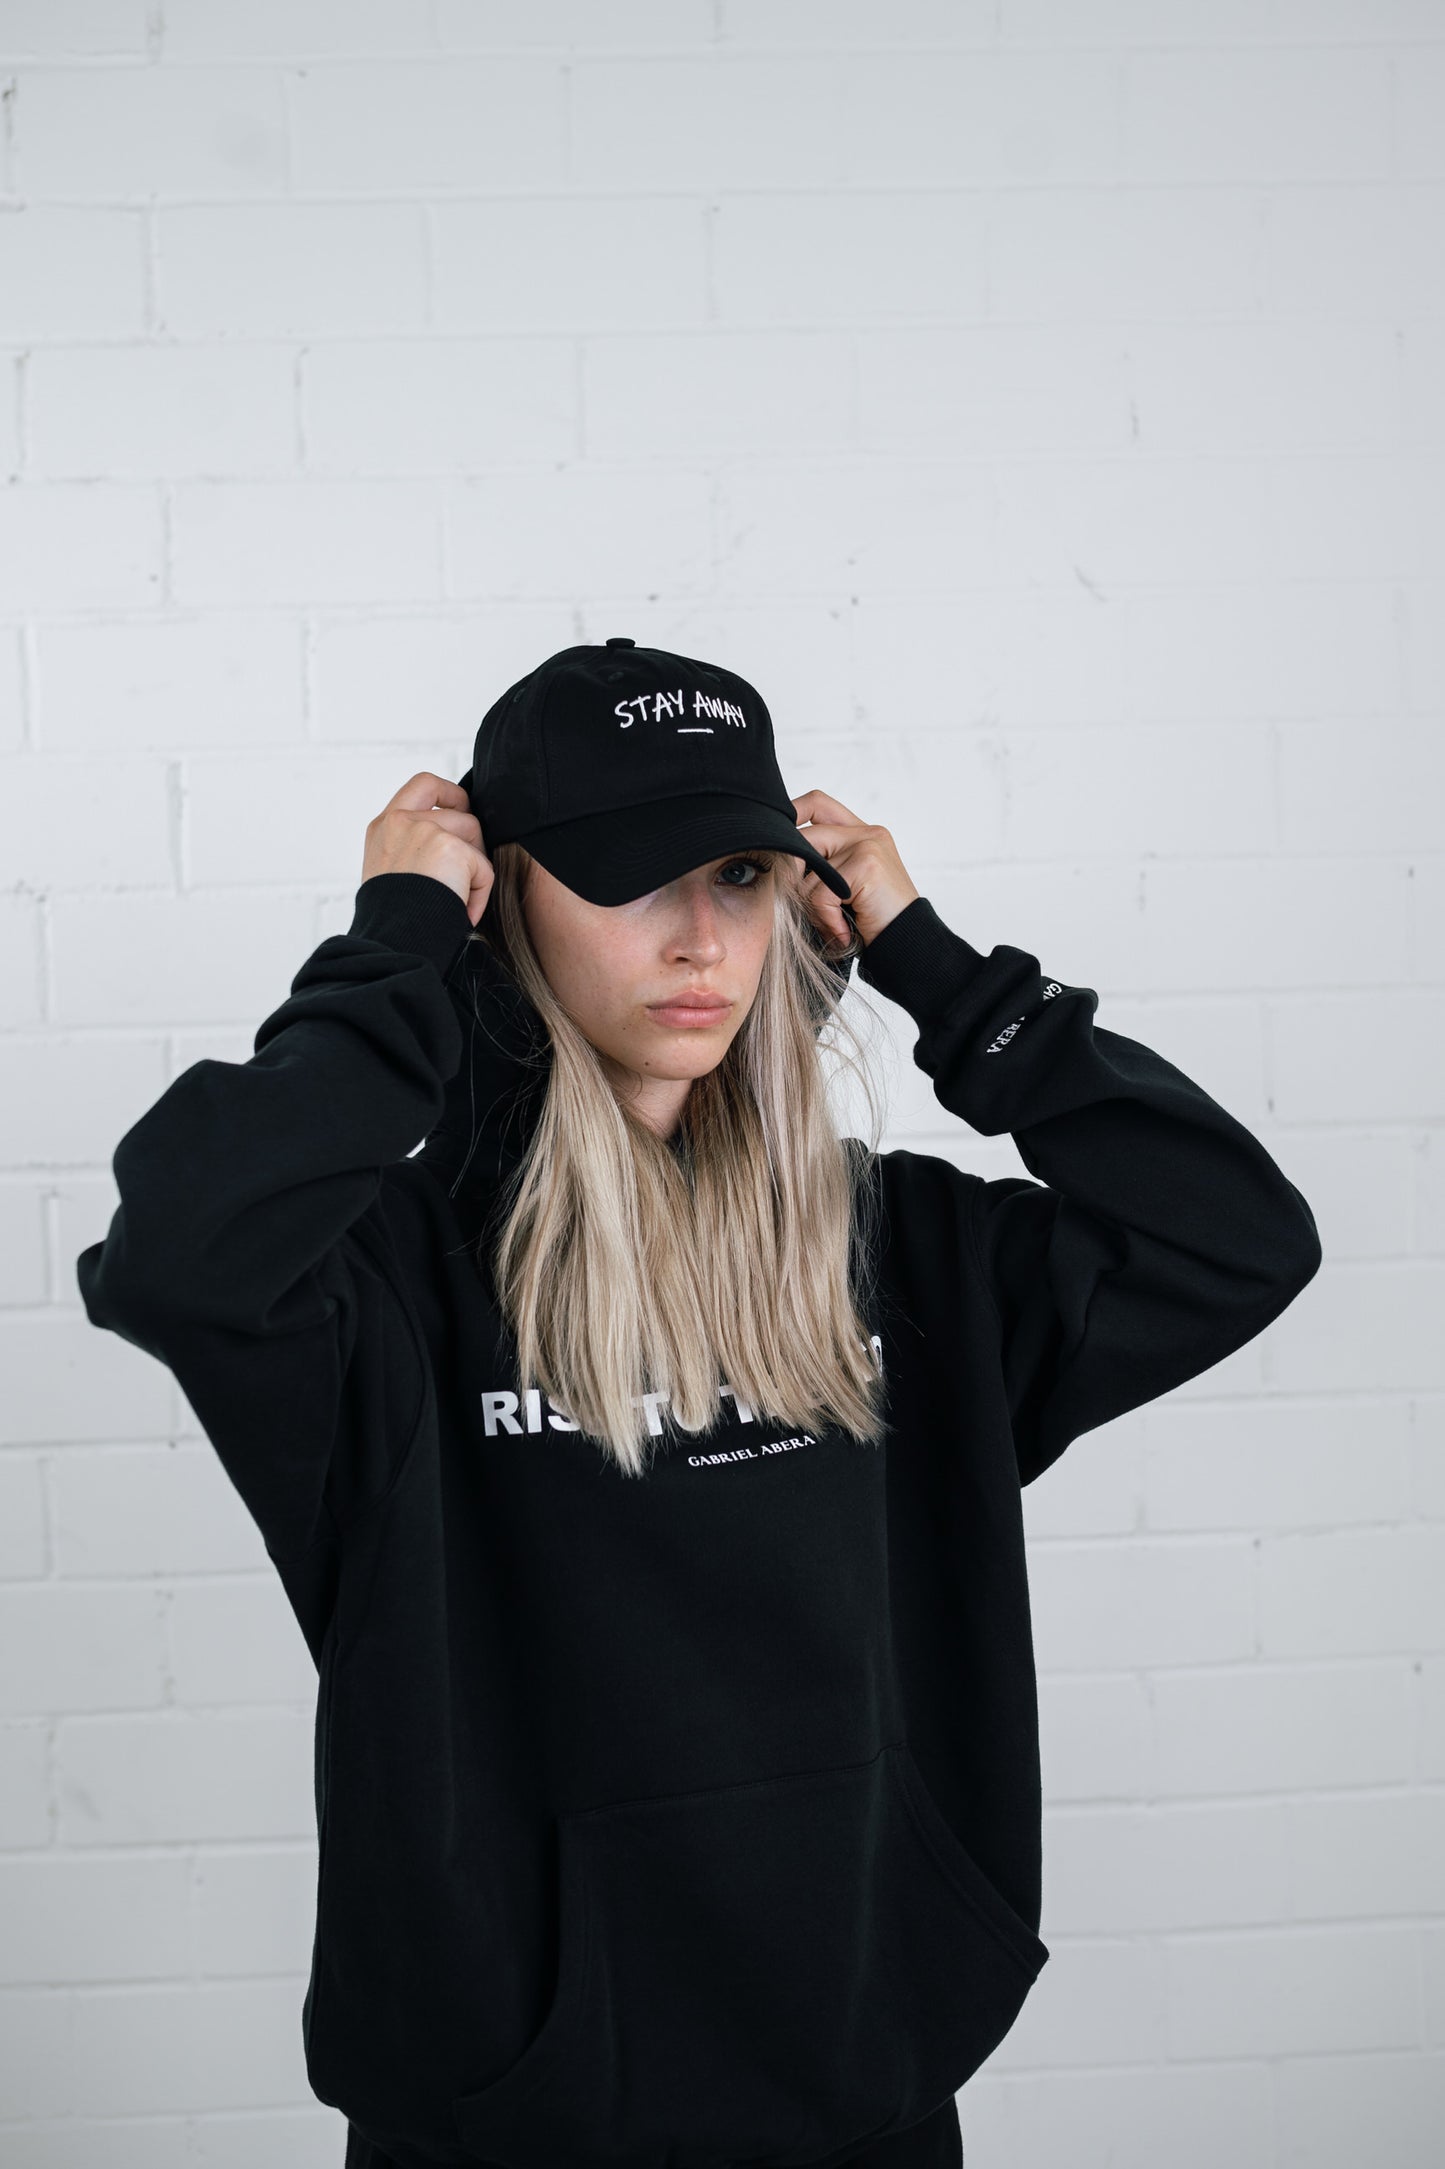 Female model wearing a Black cap with white stay away embroidery